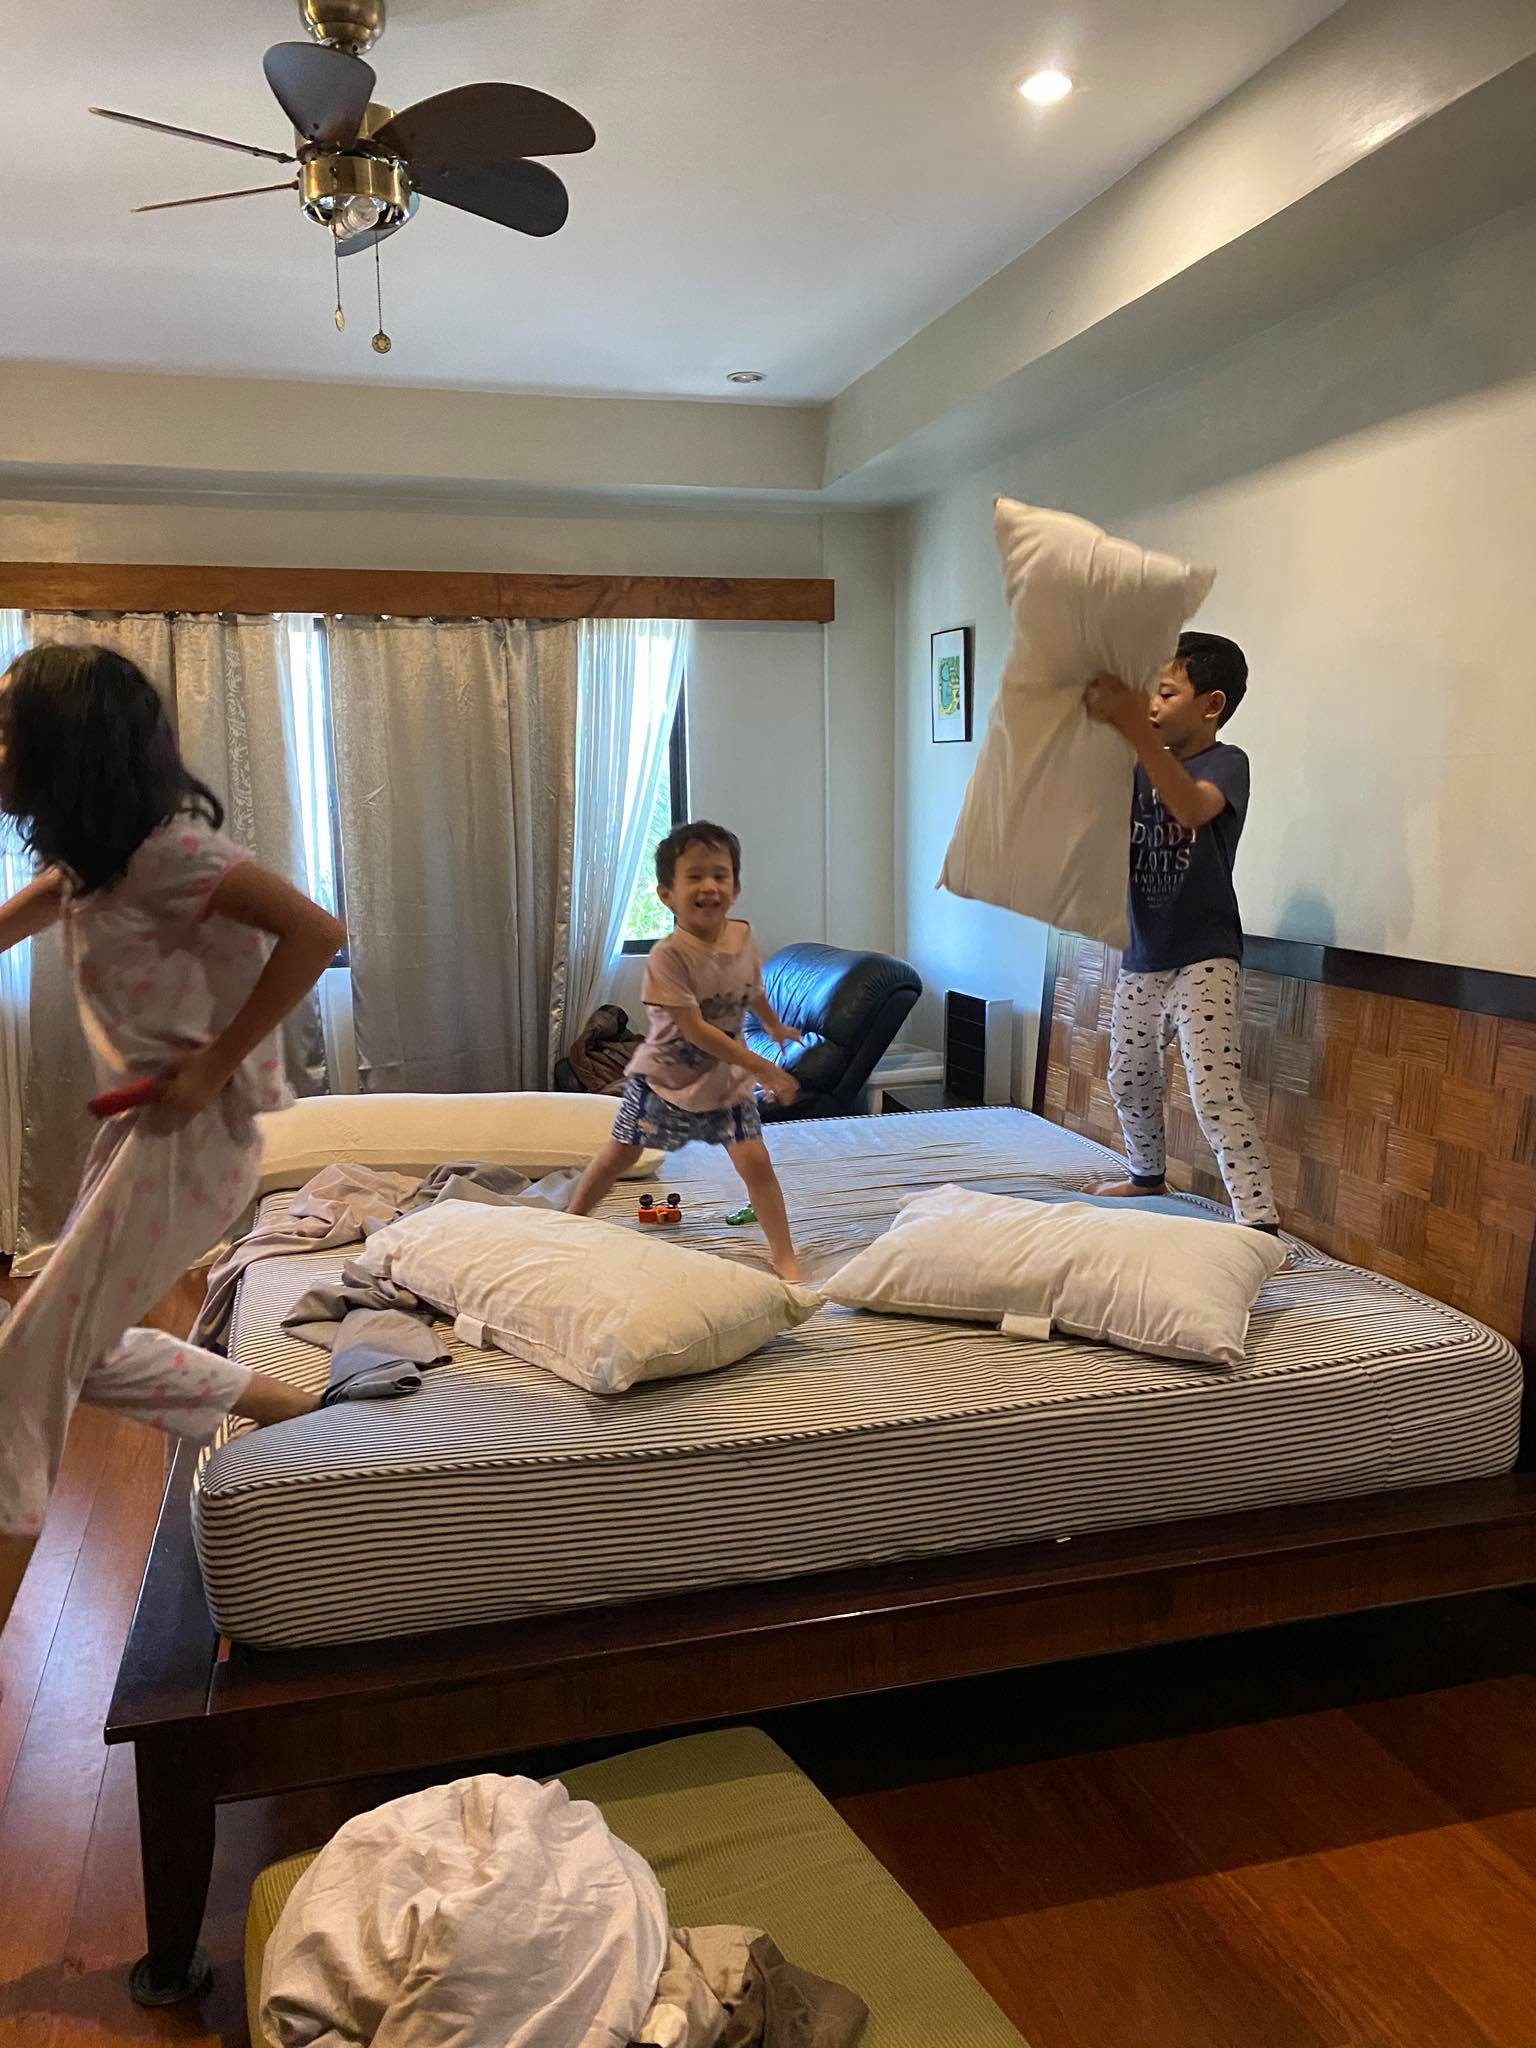 PRODUCTIVE PLAY. The kids enjoy a pillow fight – a privilege that comes with changing bedsheets. Photo courtesy of Nikki Briones Carsi-Cruz 